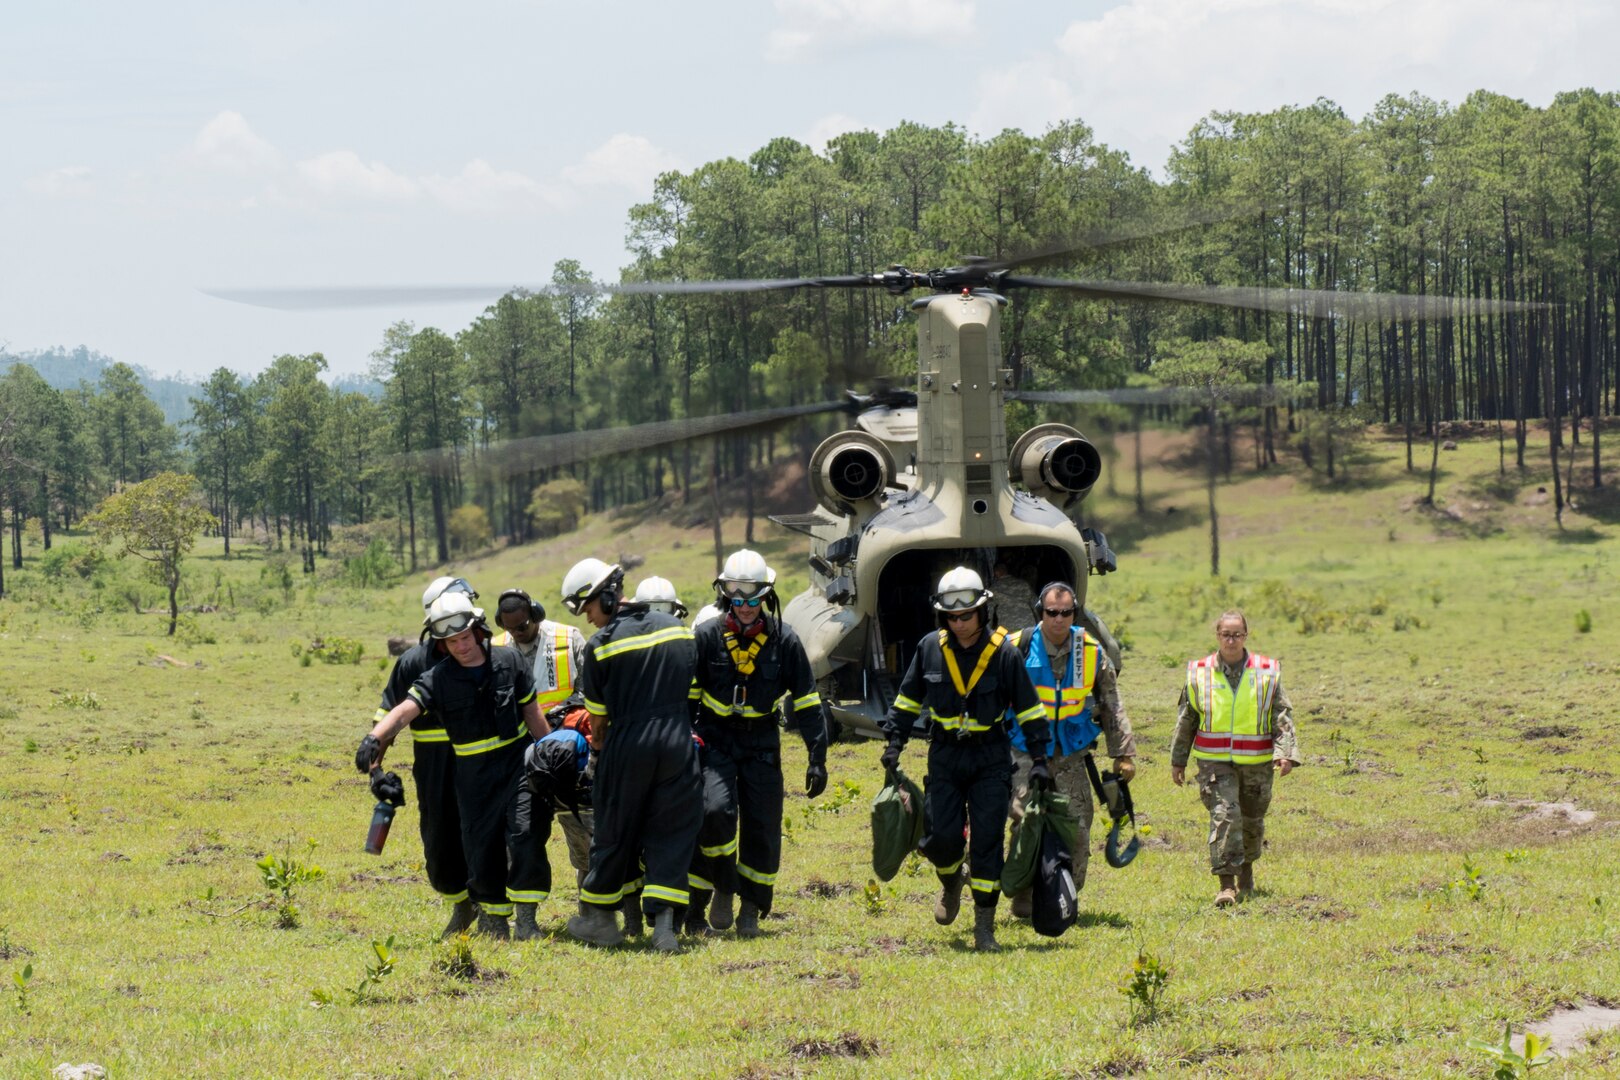 A group of 612th Air Base Squadron firefighters carry equipment from a CH-47 Chinook to the site of a simulated aircraft crash during a search and rescue exercise, May 21, 2019, in Comayagua, Honduras. Members from various units on Joint Task Force – Bravo participated in the exercise that simulated a HH-60 Blackhawk crashed during a routine flight carrying personnel. The exercise practiced notification, recall, search and rescue, on-scene medical care, recovery of personnel from low and high angle austere terrain, and medical care once the injured returned to base. (U.S. Air Force photo by Staff Sgt. Eric Summers Jr.)